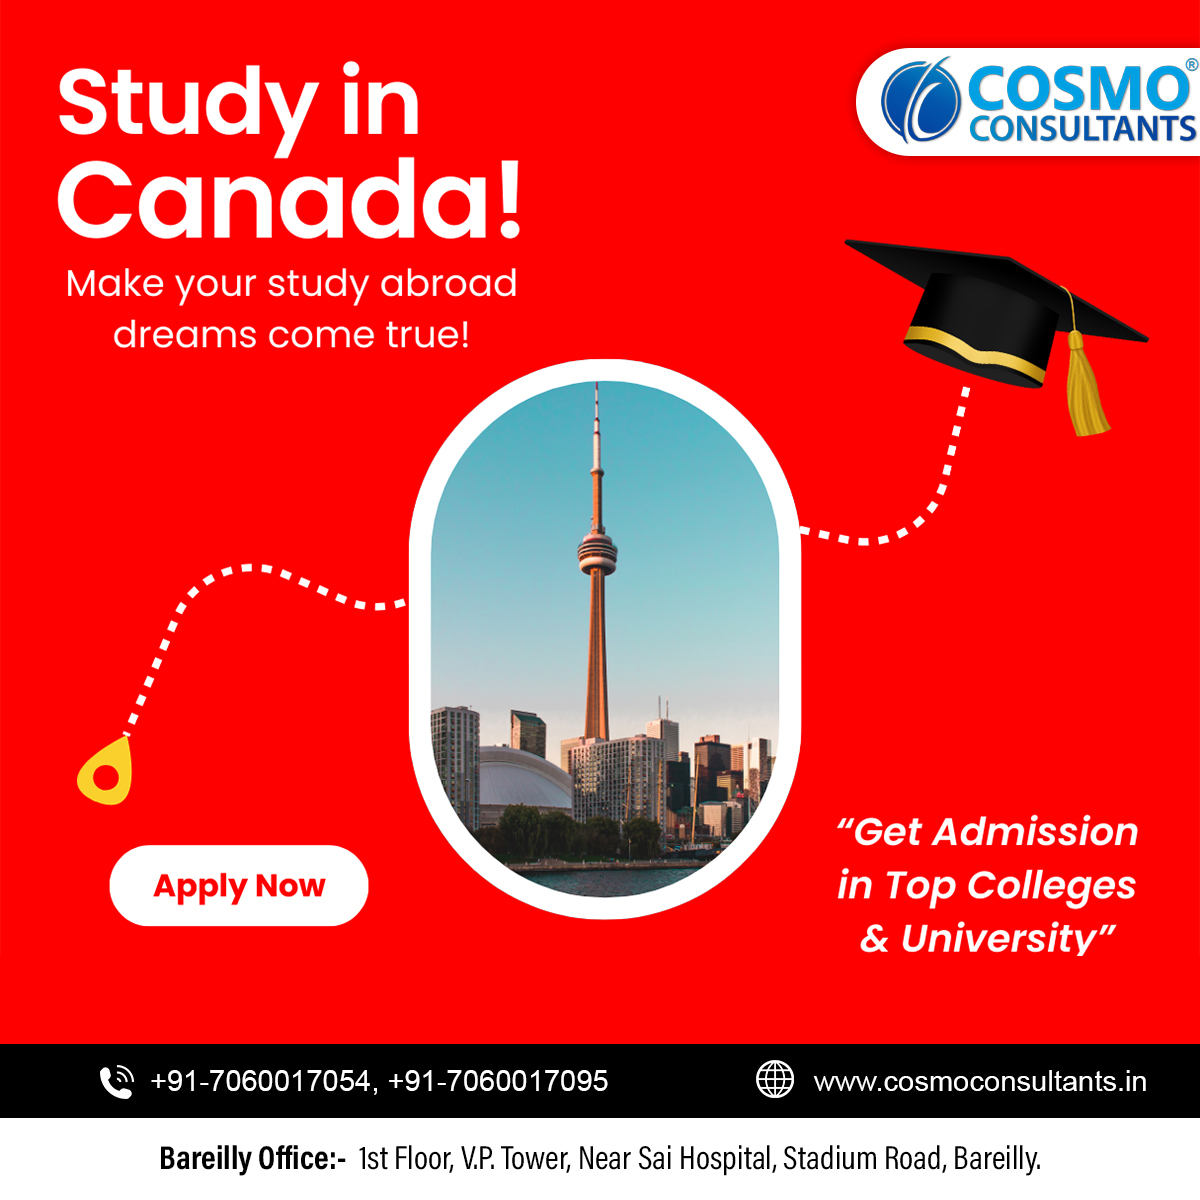 Ready to pursue your education in Canada? 🇨🇦✨ Visit Cosmo Consultants for expert guidance and turn your study abroad dreams into reality! 🎓🌏 Get Free Consultation: +91-7060017054, +91-7060017095. #CosmoConsultants #Canada #StudyInCanada #StudyAbroad #studentvisa #studyvisa